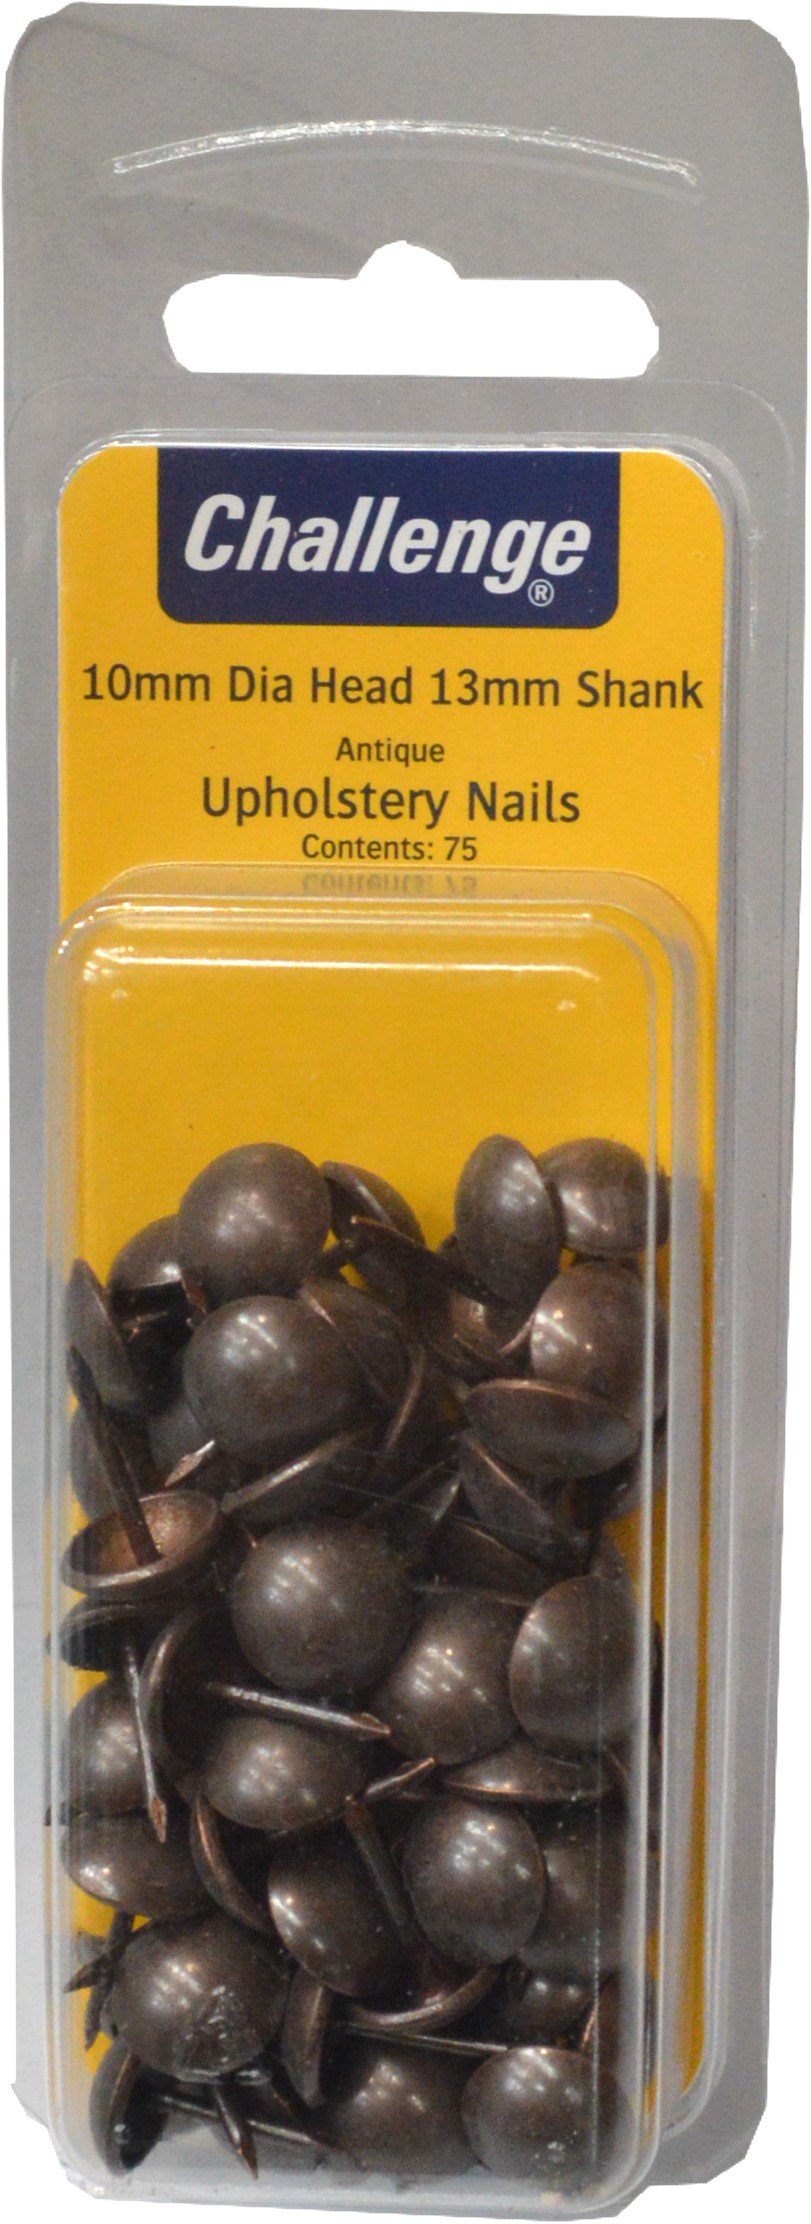 Upholstery Nails - 75pce Blister Pack Antique Challenge